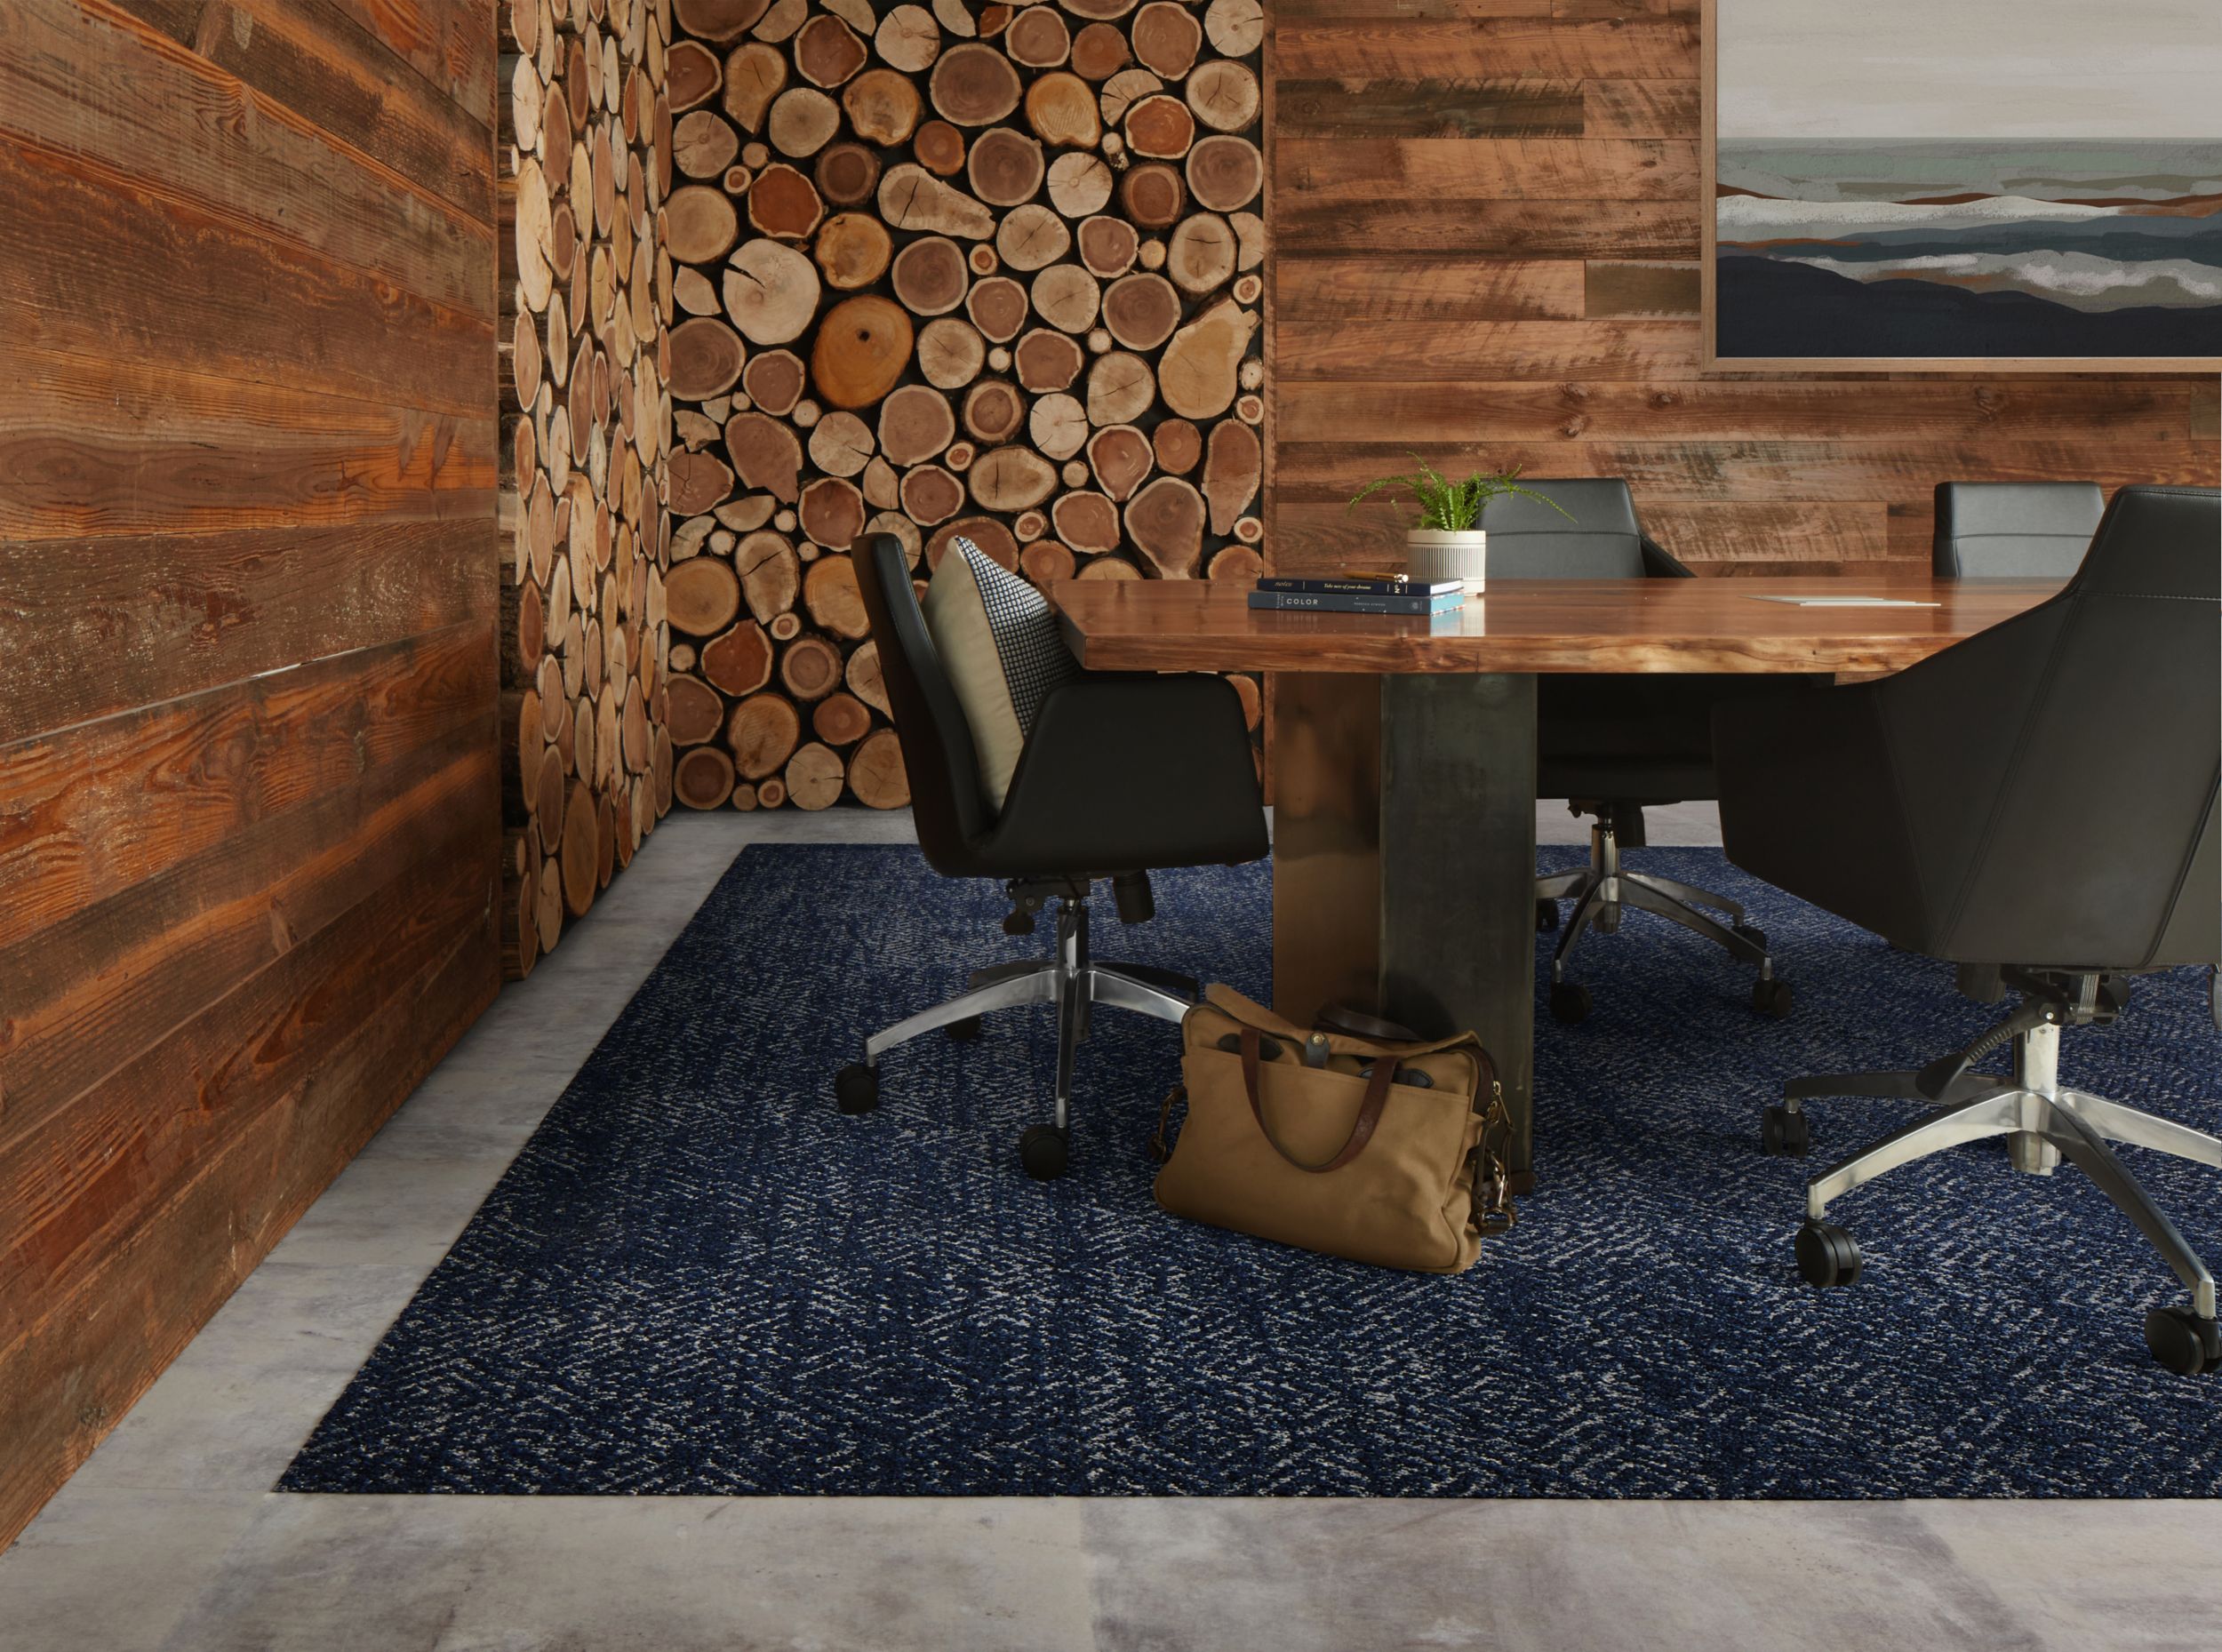 Interface Third Space 309 carpet tile with Textured Stones LVT in meeting room with wood walls and accents imagen número 7